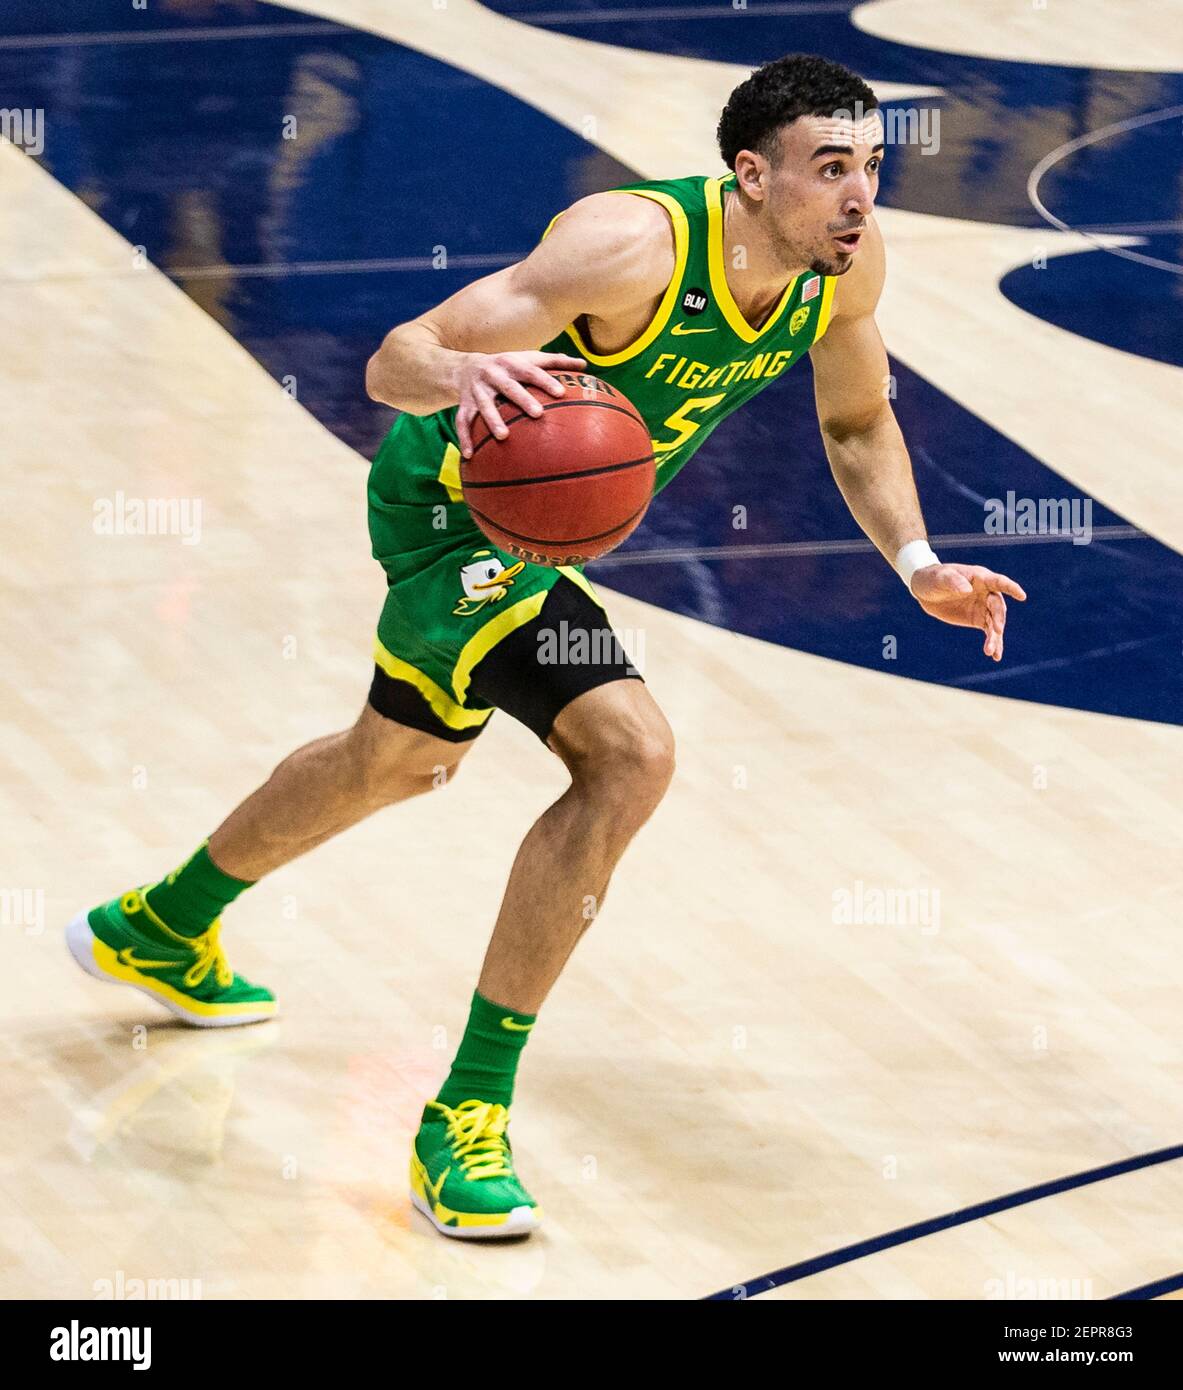 February 27 2021 Berkeley, CA U.S.A. Oregon guard Chris Duarte (5) goes to  the basket during the NCAA Men's Basketball game between Oregon Ducks and  the California Golden Bears 74-63 win at